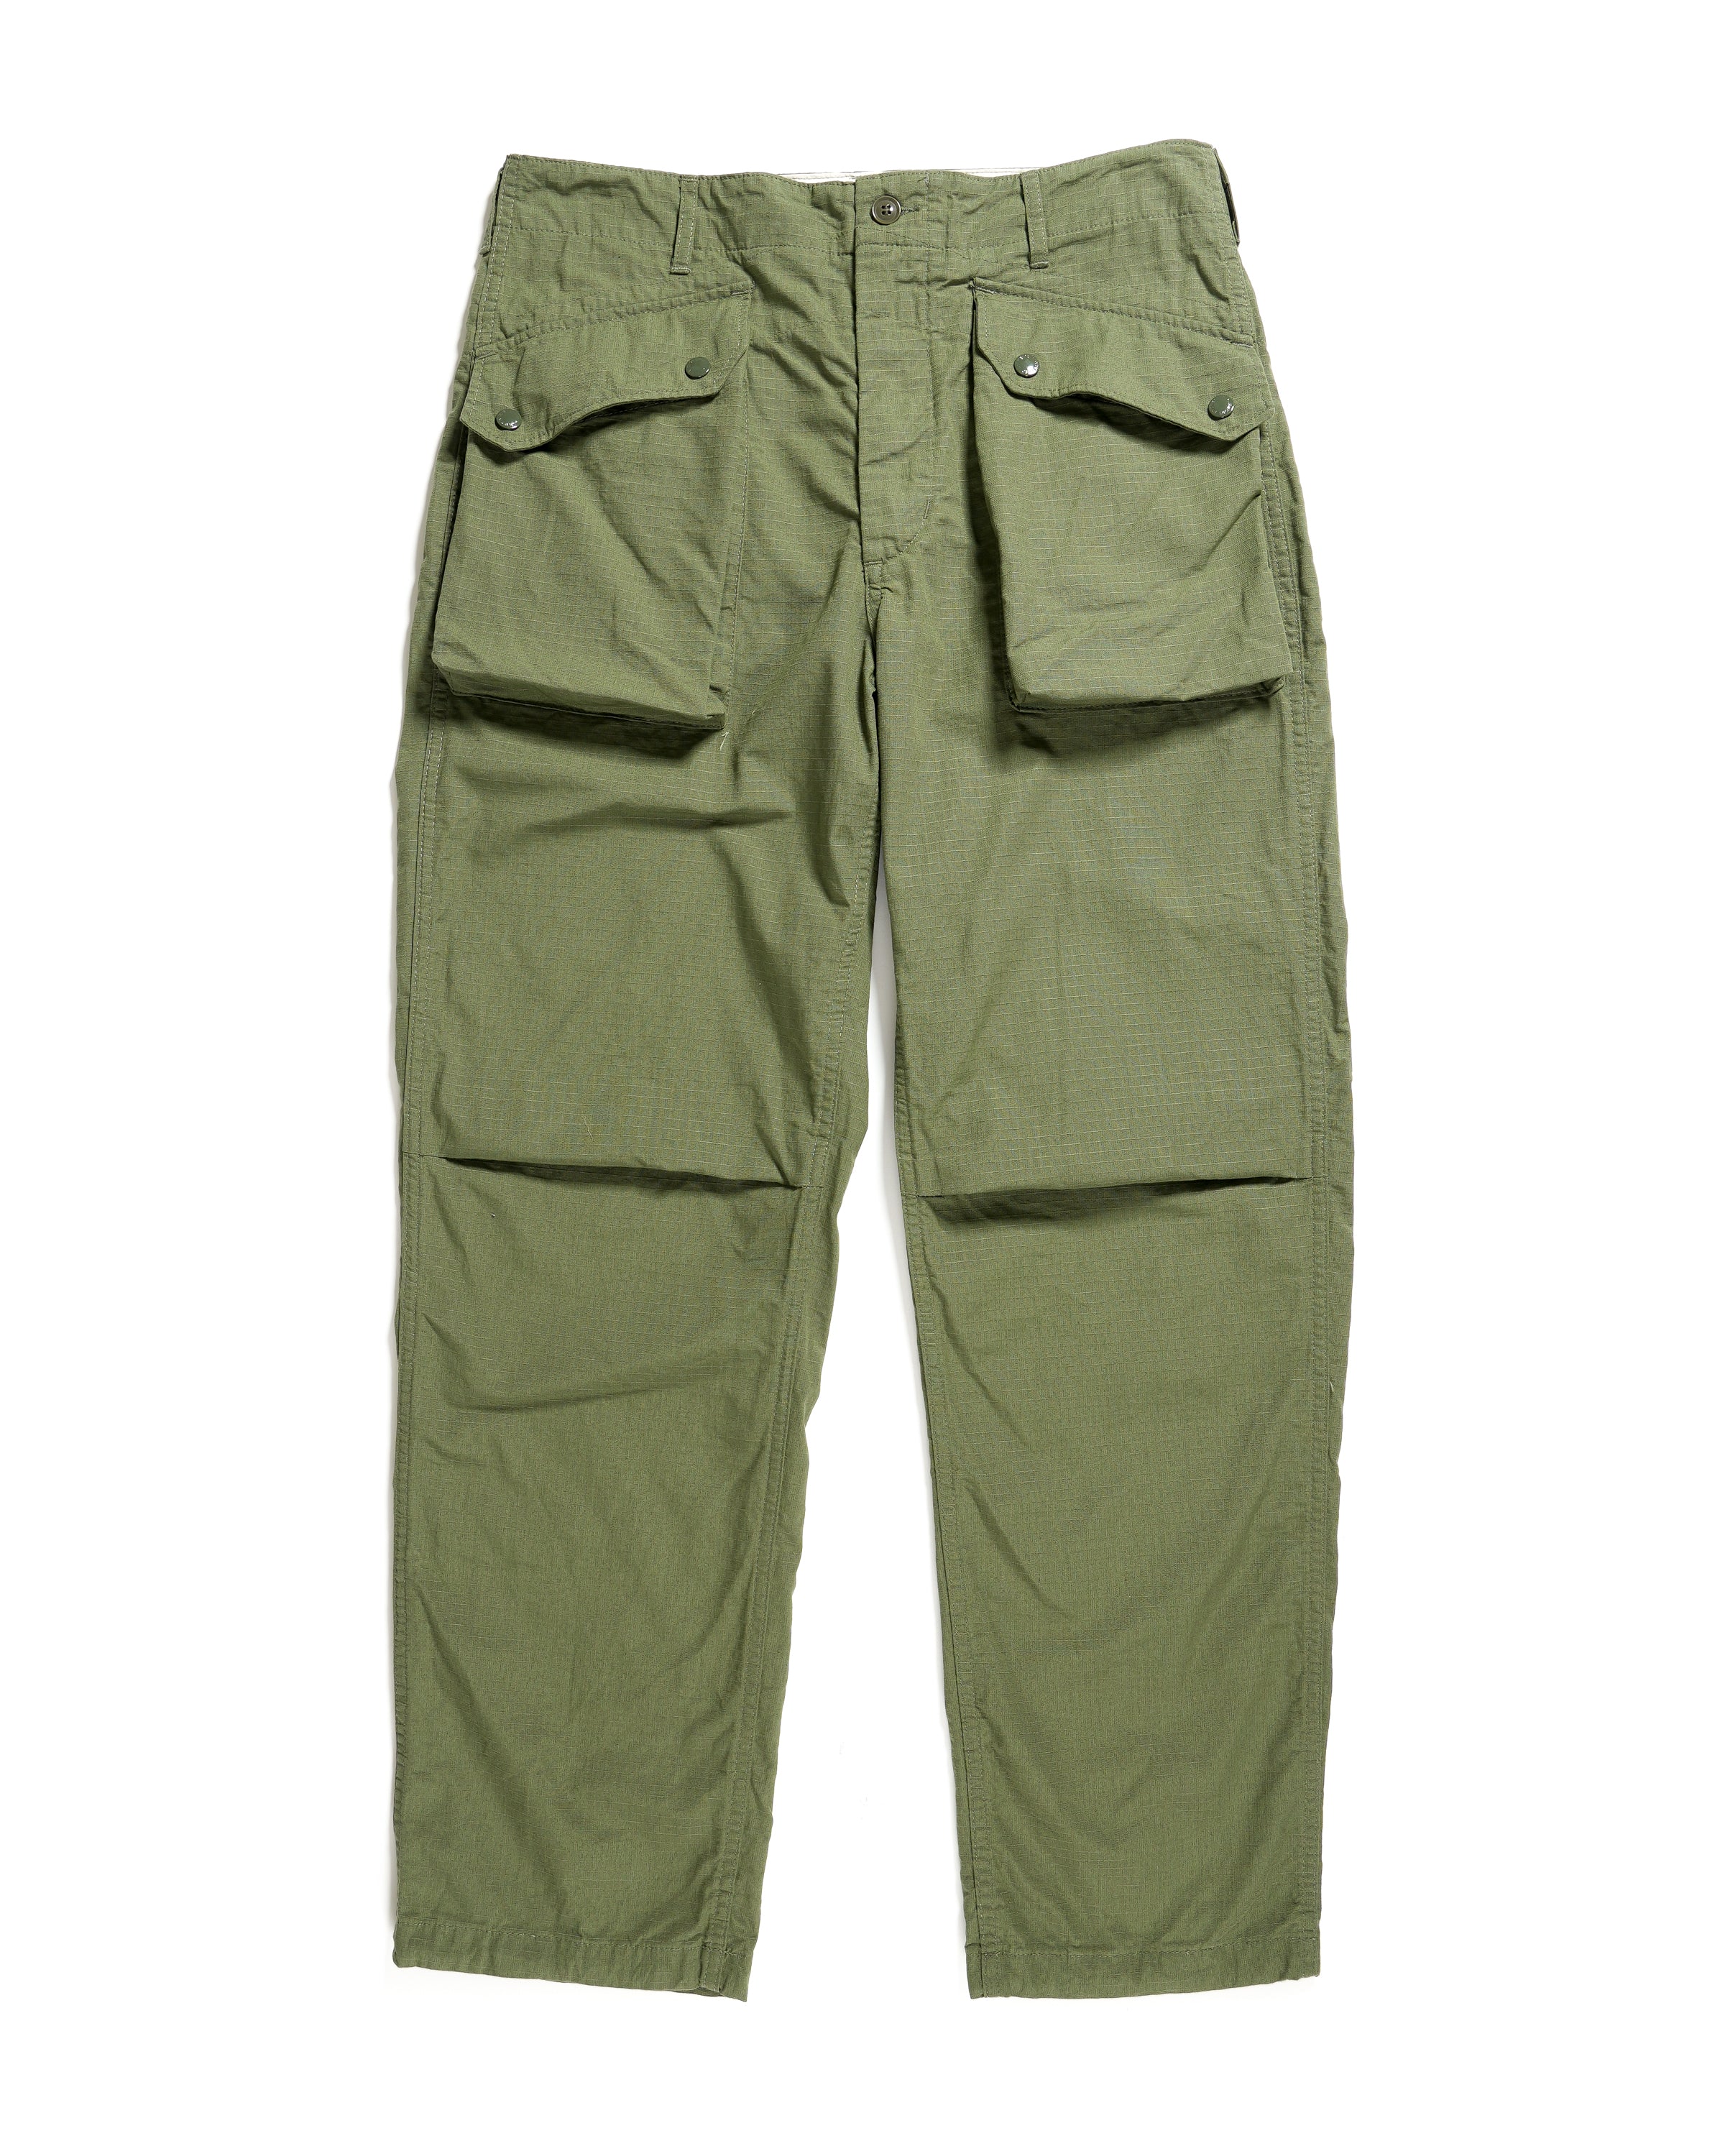 Norwegian Pant - Olive Cotton Ripstop - NNY SP